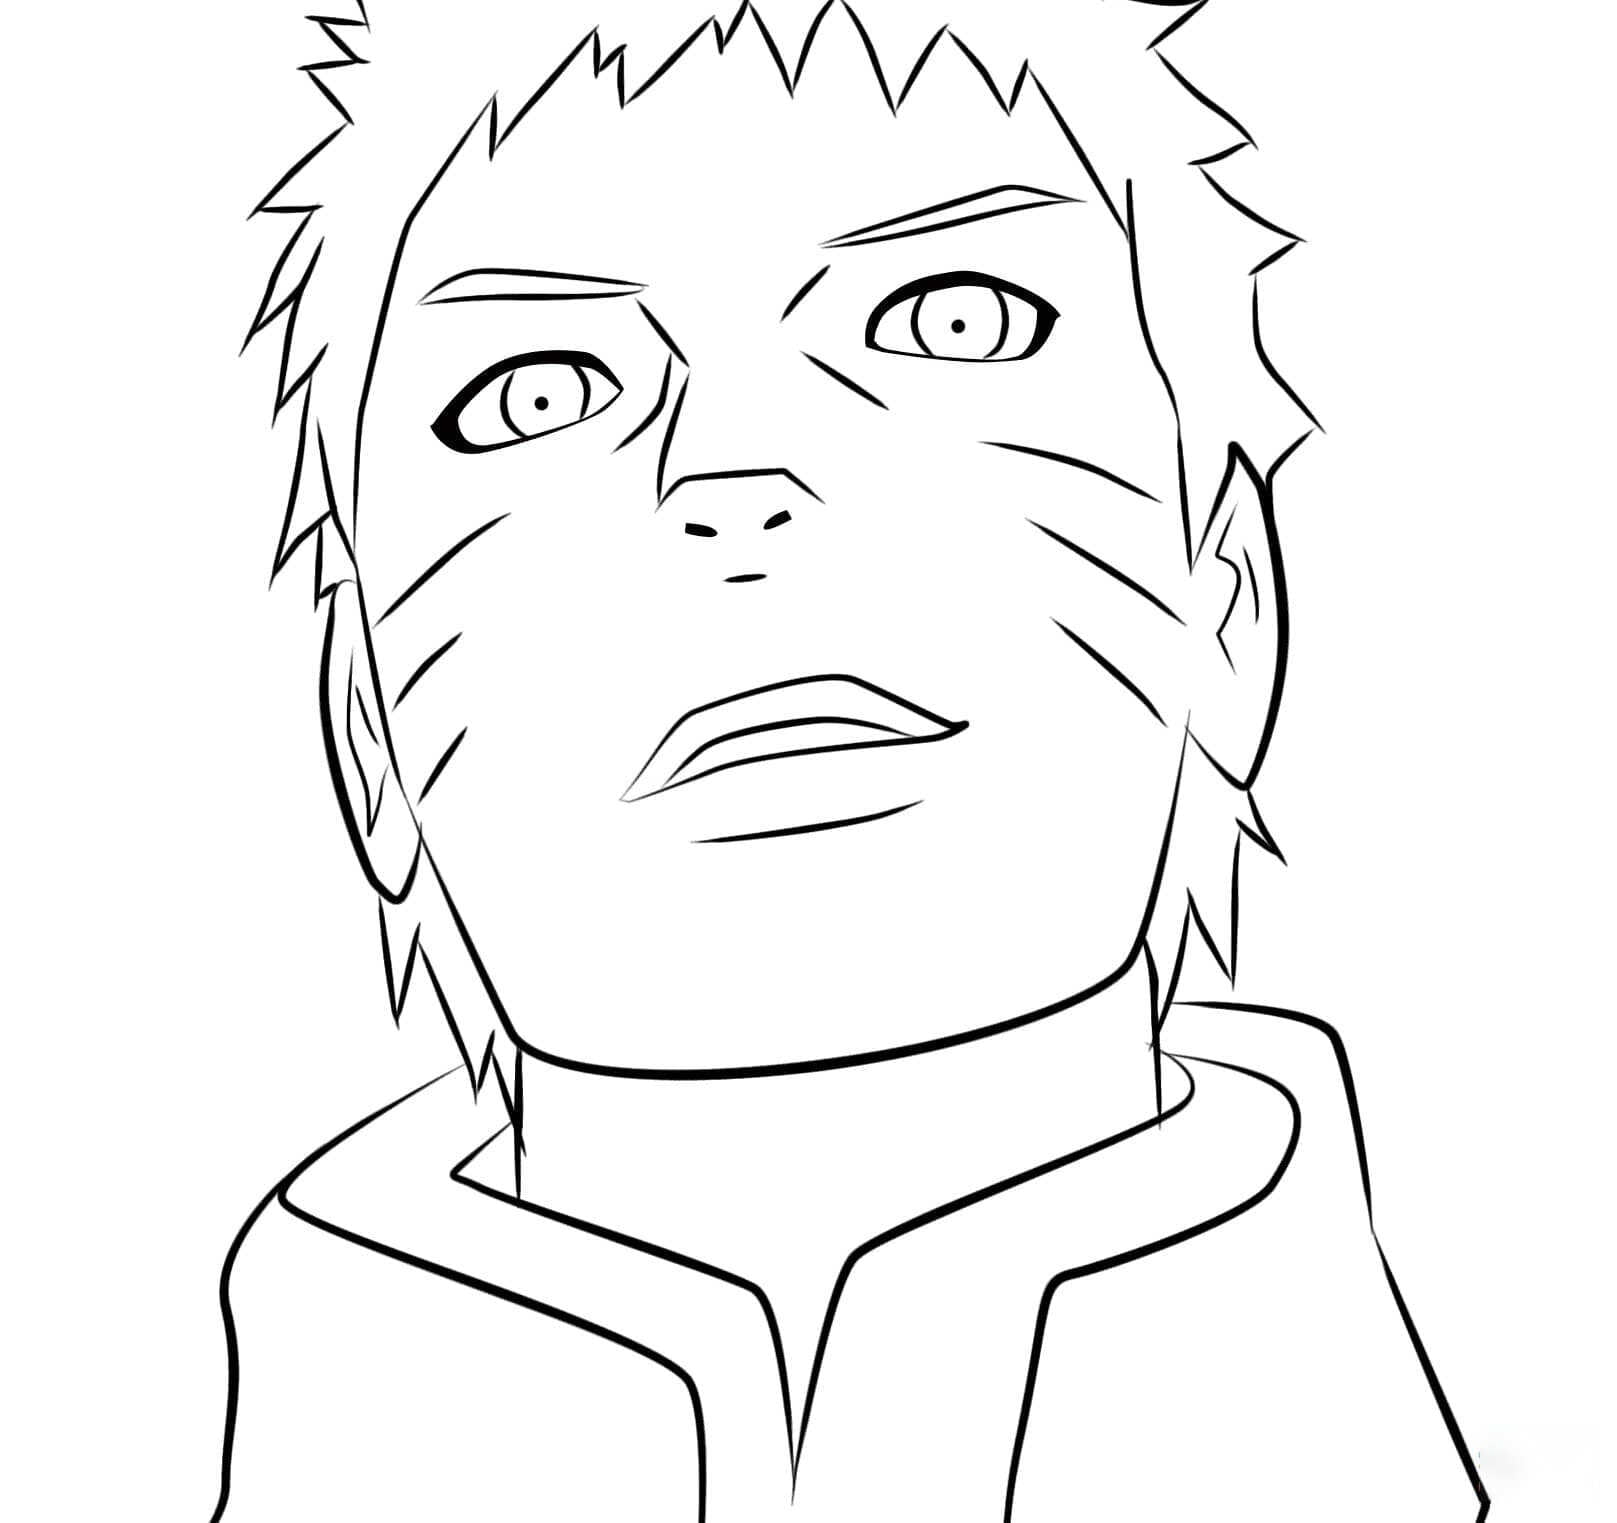 Hokage Naruto after completing the missions Coloring Page